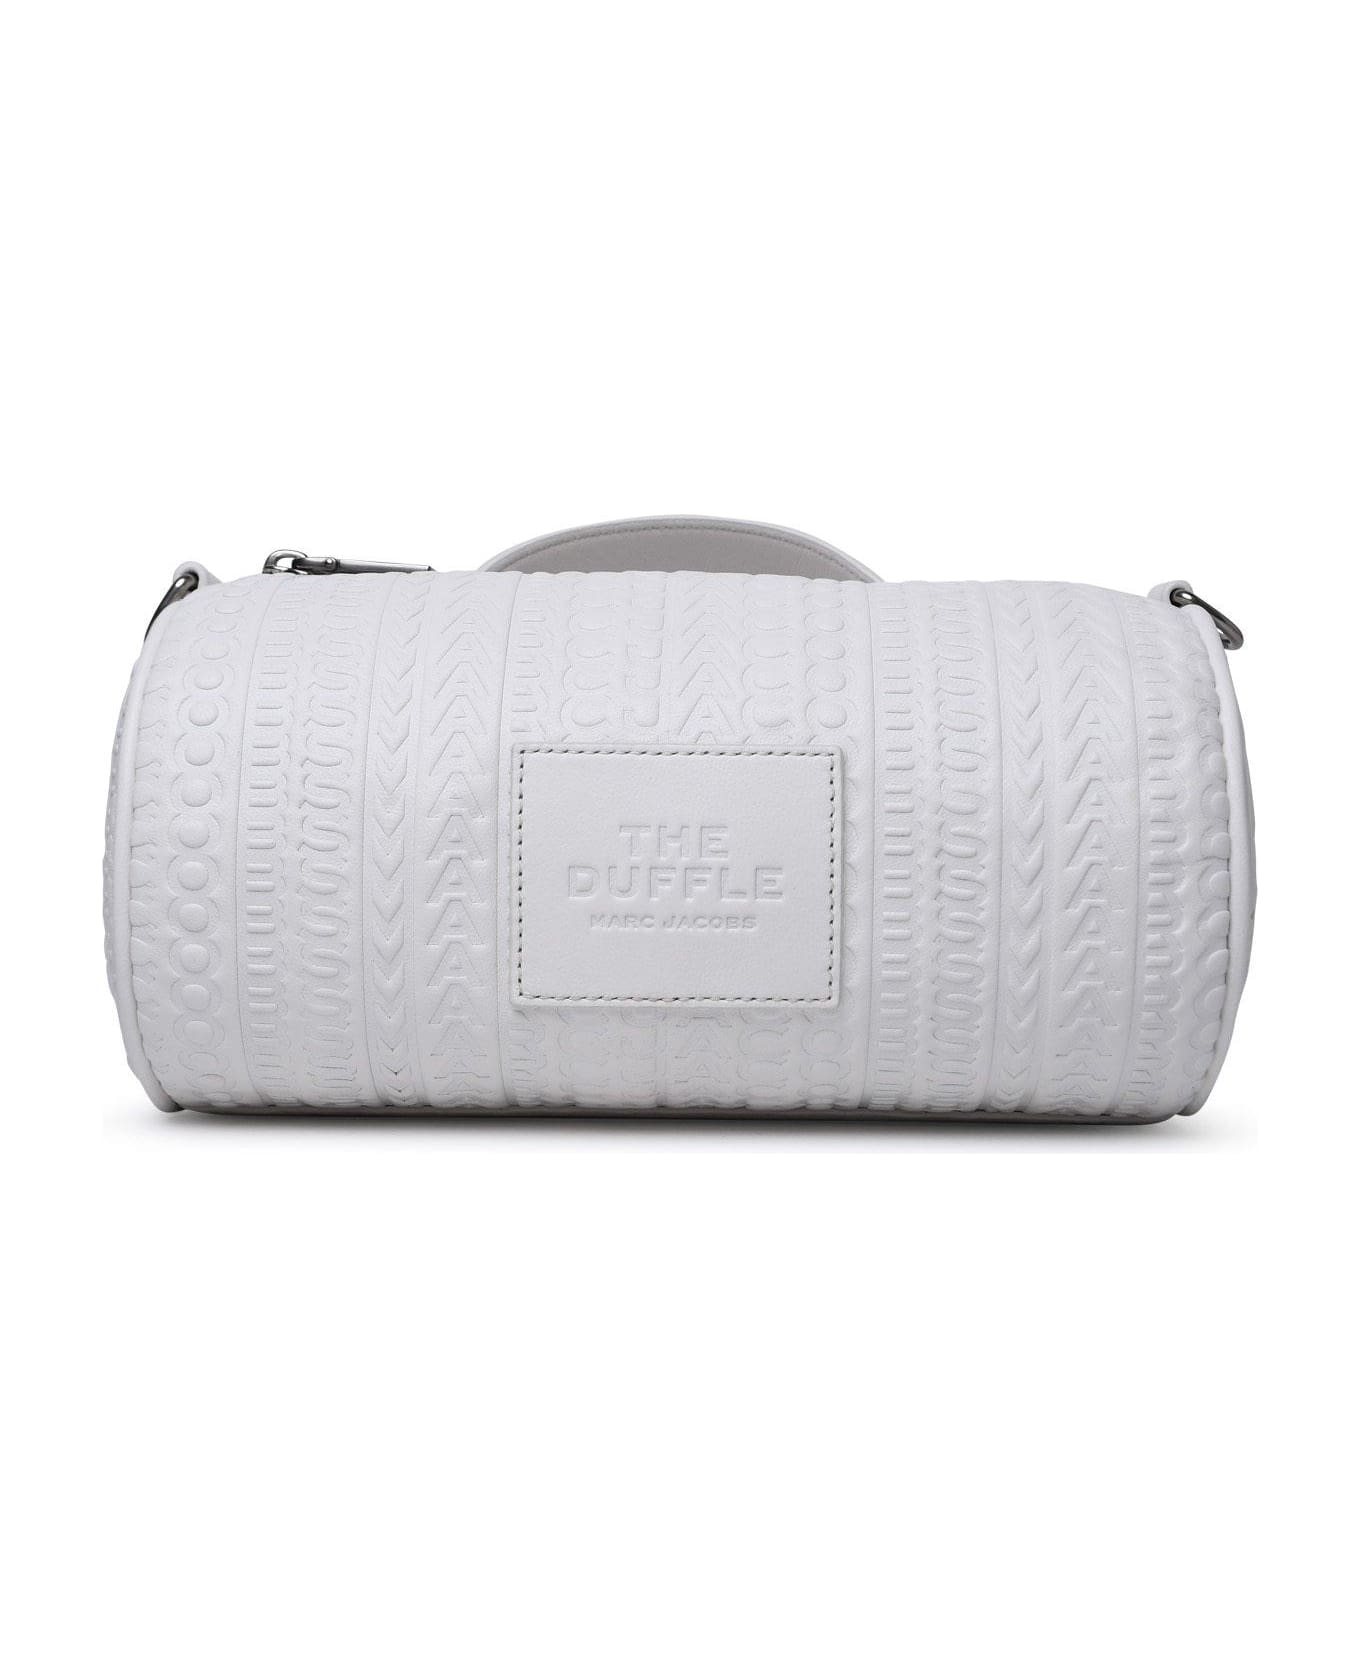 Marc Jacobs Logo Patch Duffle Bag - White トラベルバッグ